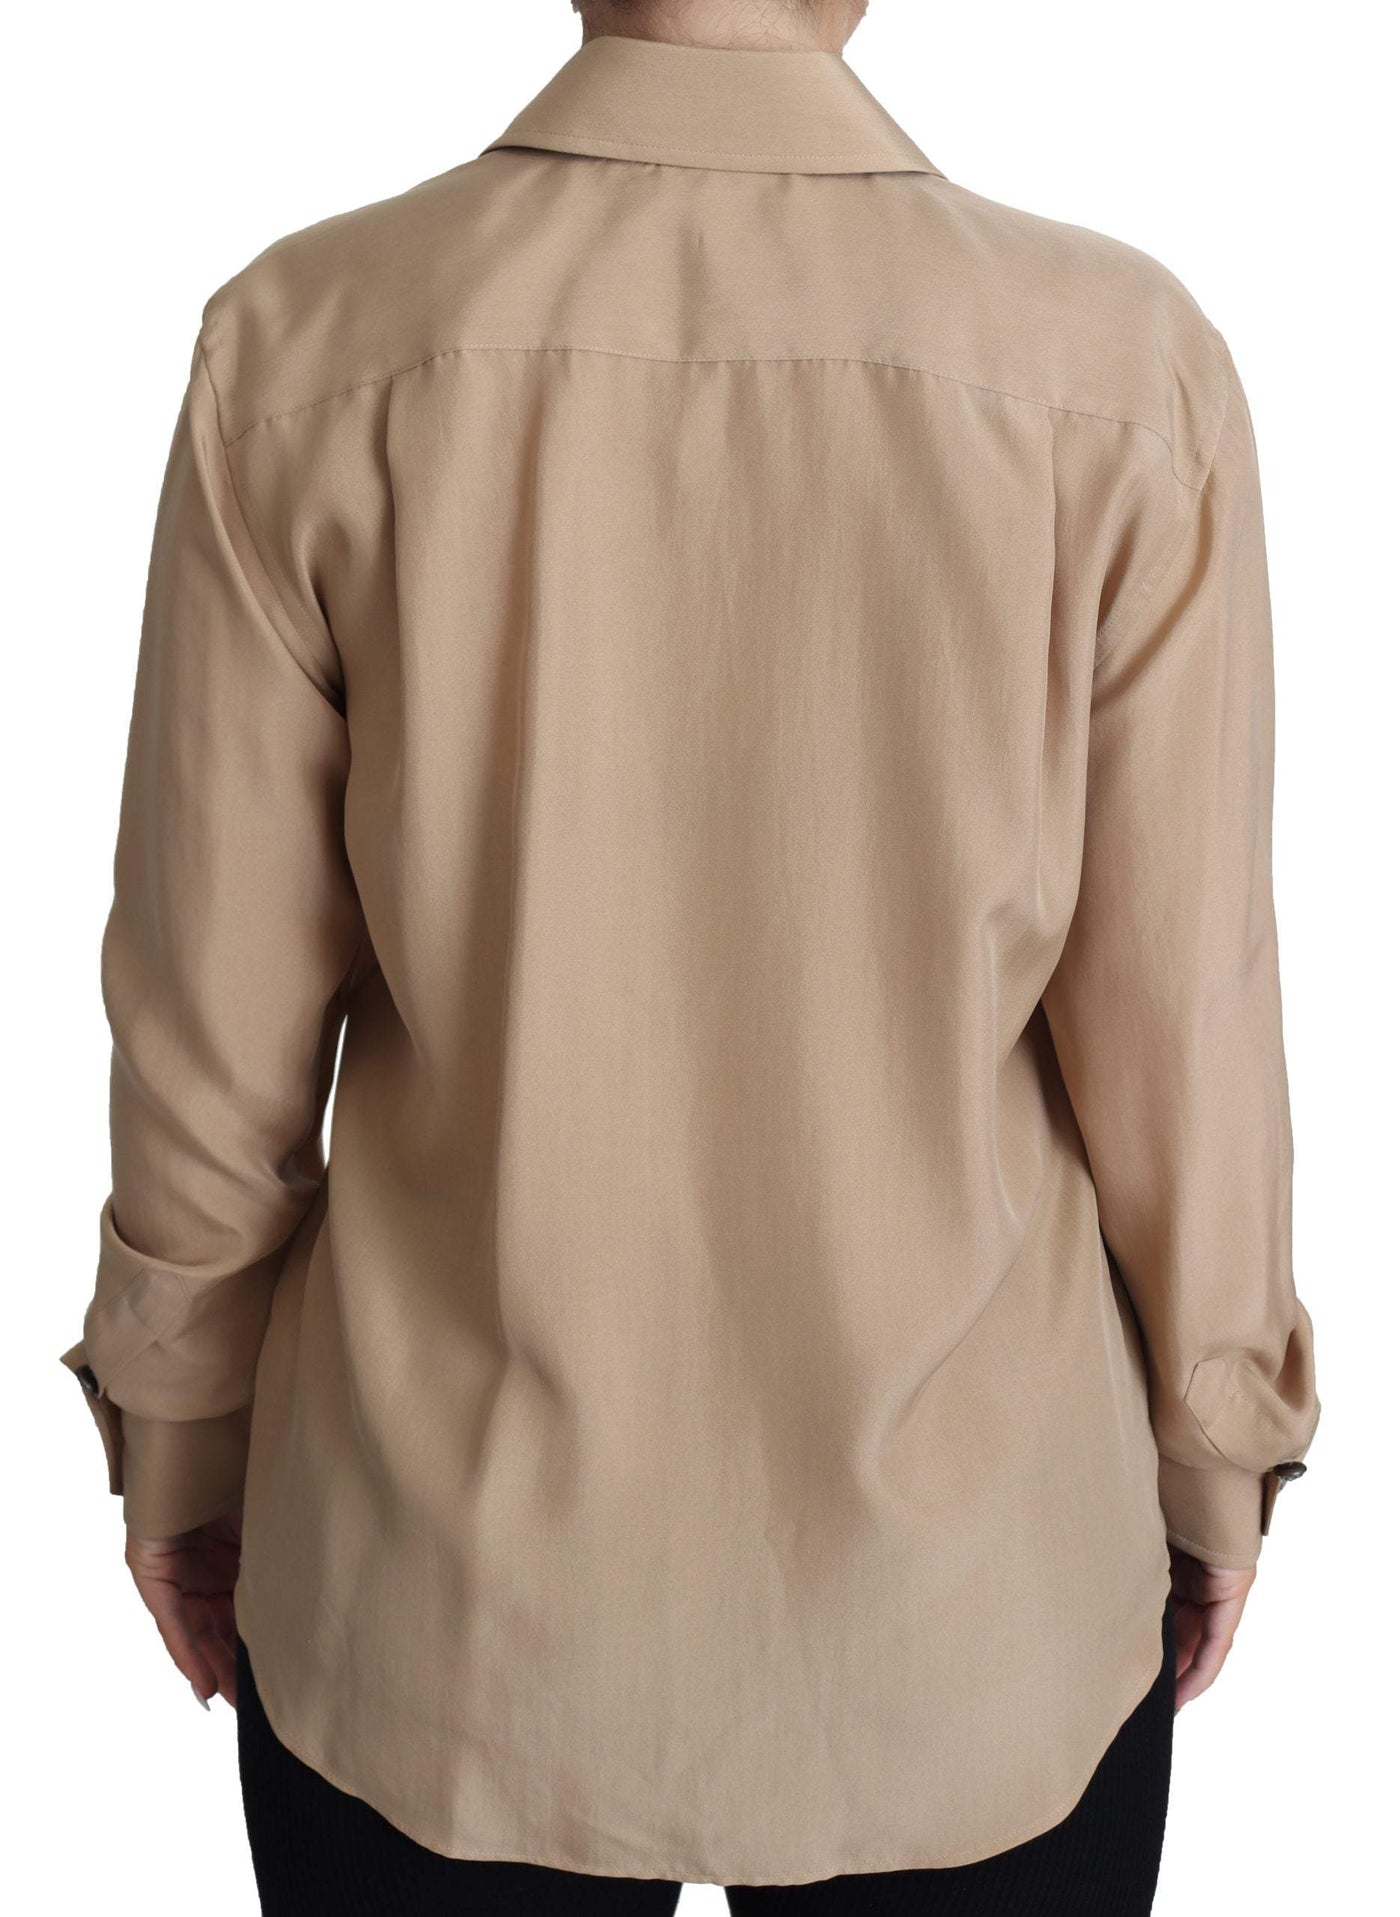 Dolce & Gabbana Beige Silk Shirt Decorative Buttons Top #women, Beige, Dolce & Gabbana, feed-agegroup-adult, feed-color-Beige, feed-gender-female, feed-size-IT38|XS, IT38|XS, Shirts - Women - Clothing, Women - New Arrivals at SEYMAYKA